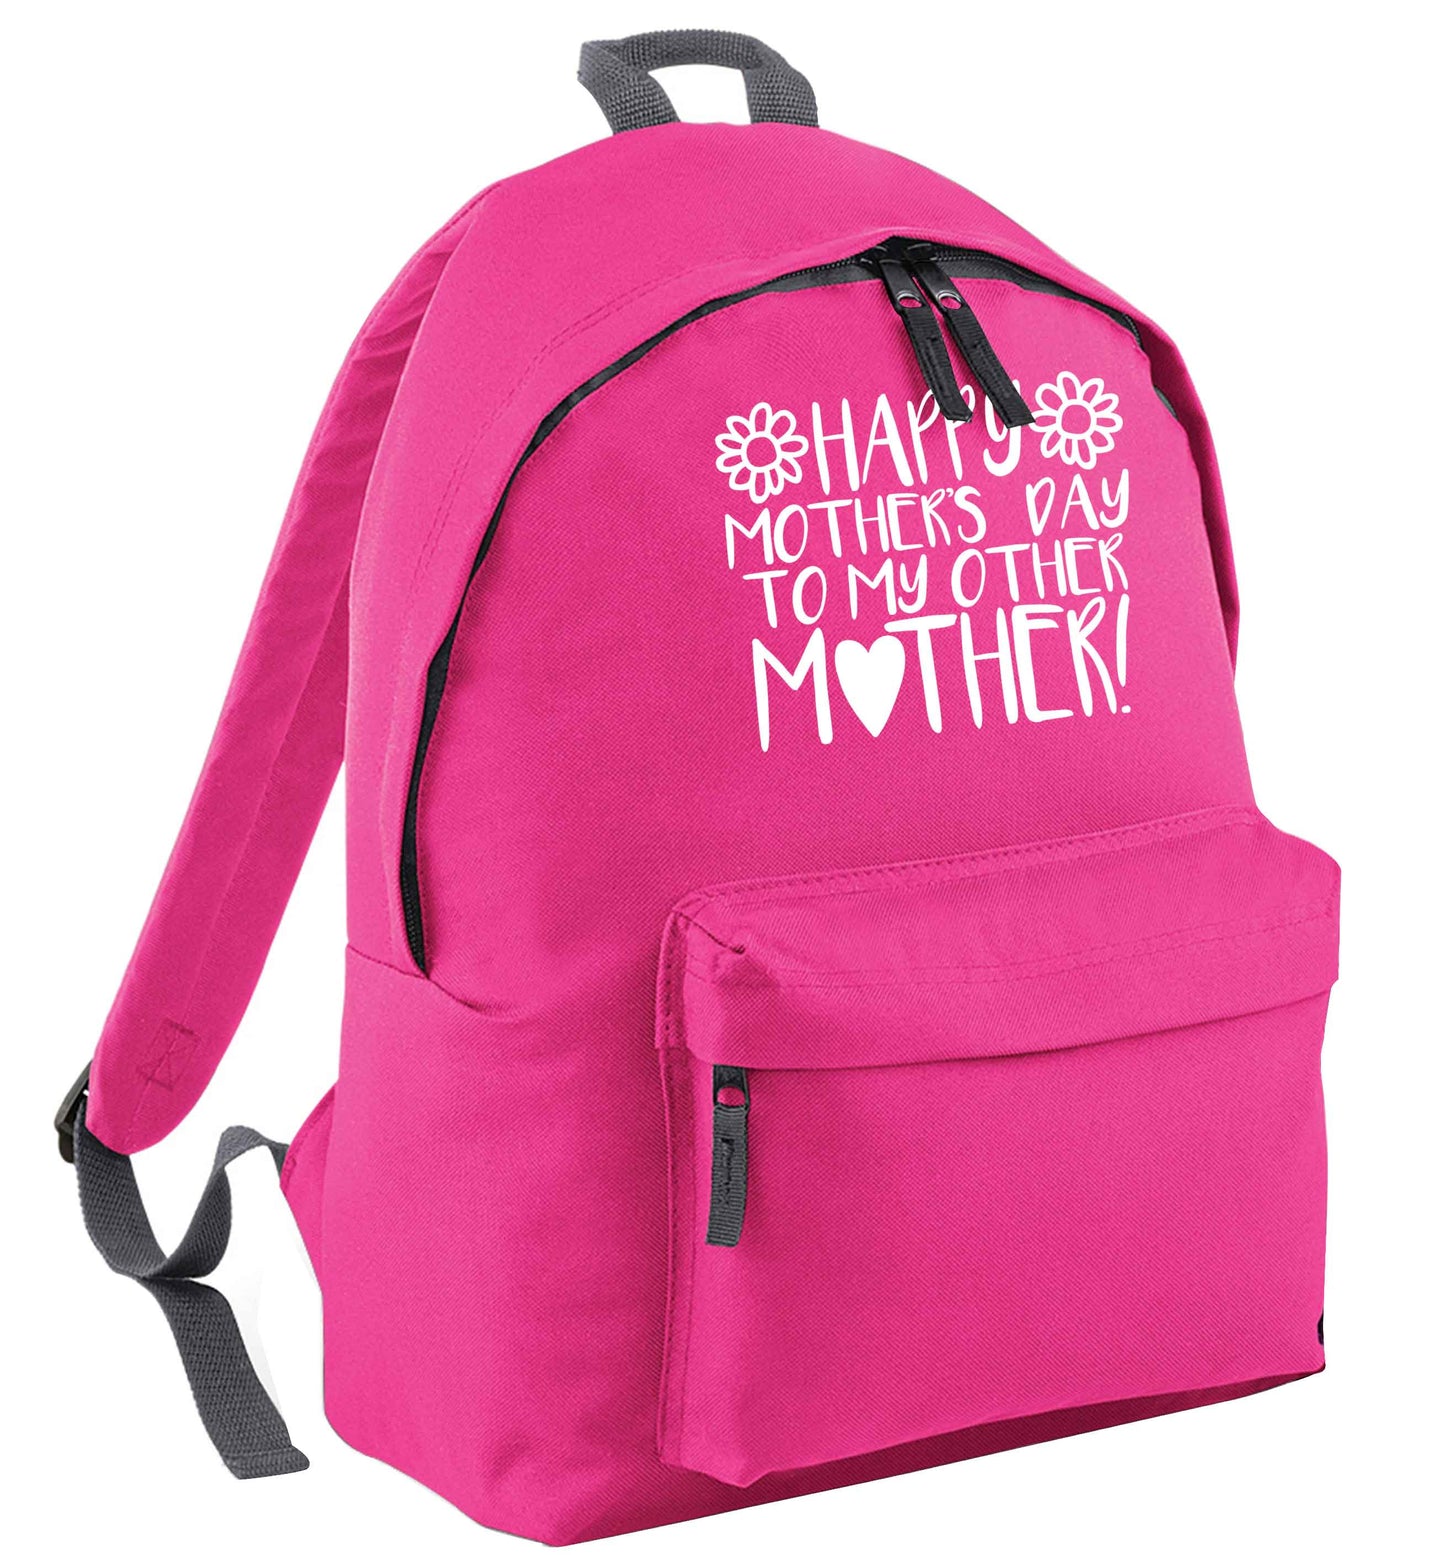 Happy mother's day to my other mother pink childrens backpack